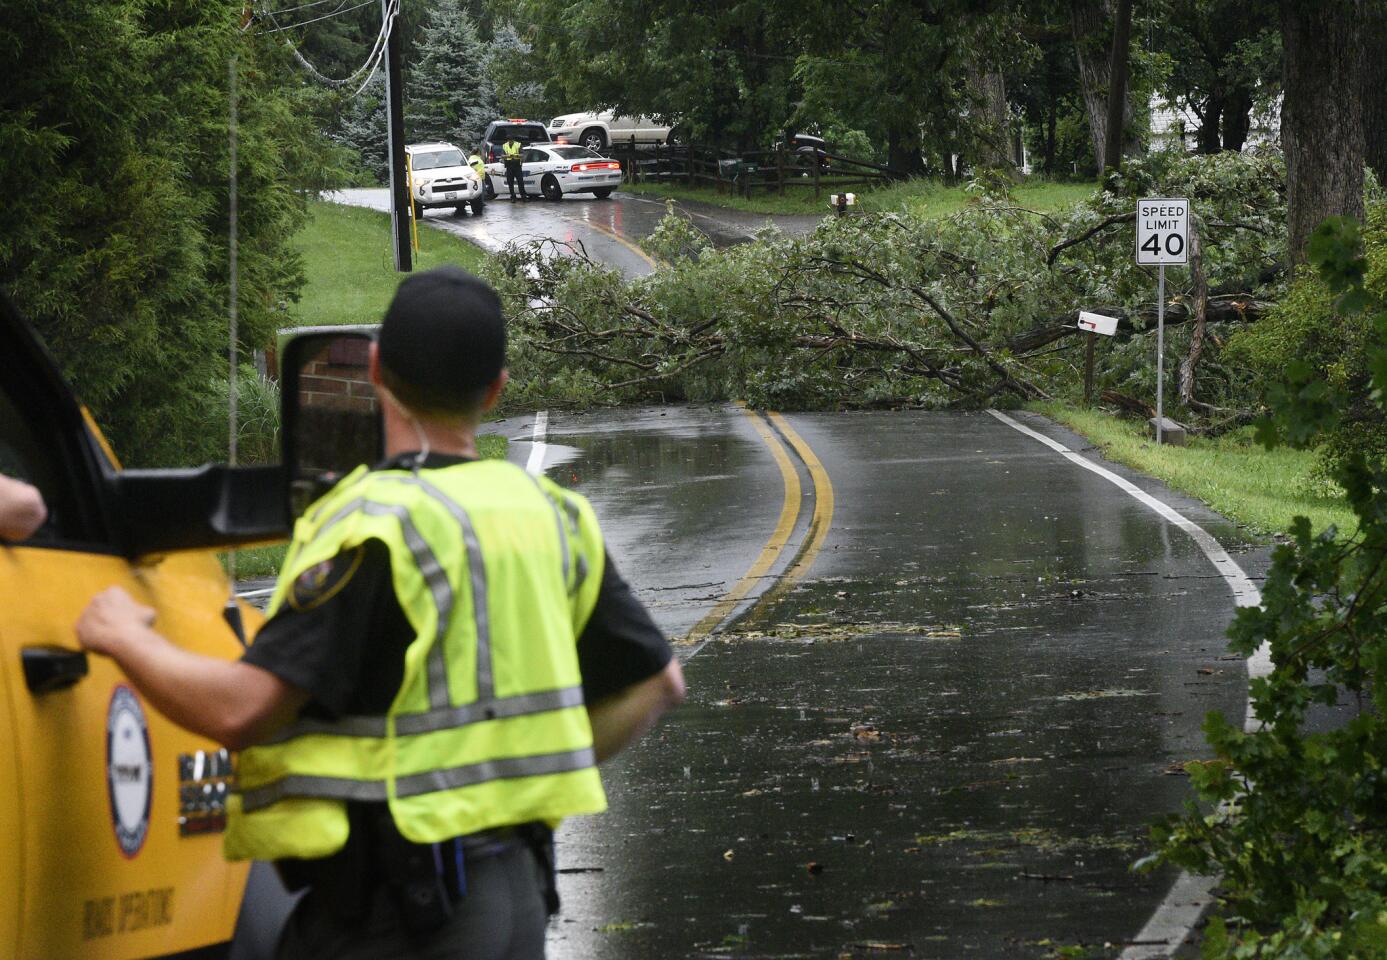 A downed tree blocks Deer Park Road at the intersection of Gracie Drive in Finksburg after a powerful storm blew through the area Monday, JUly 22, 2019.